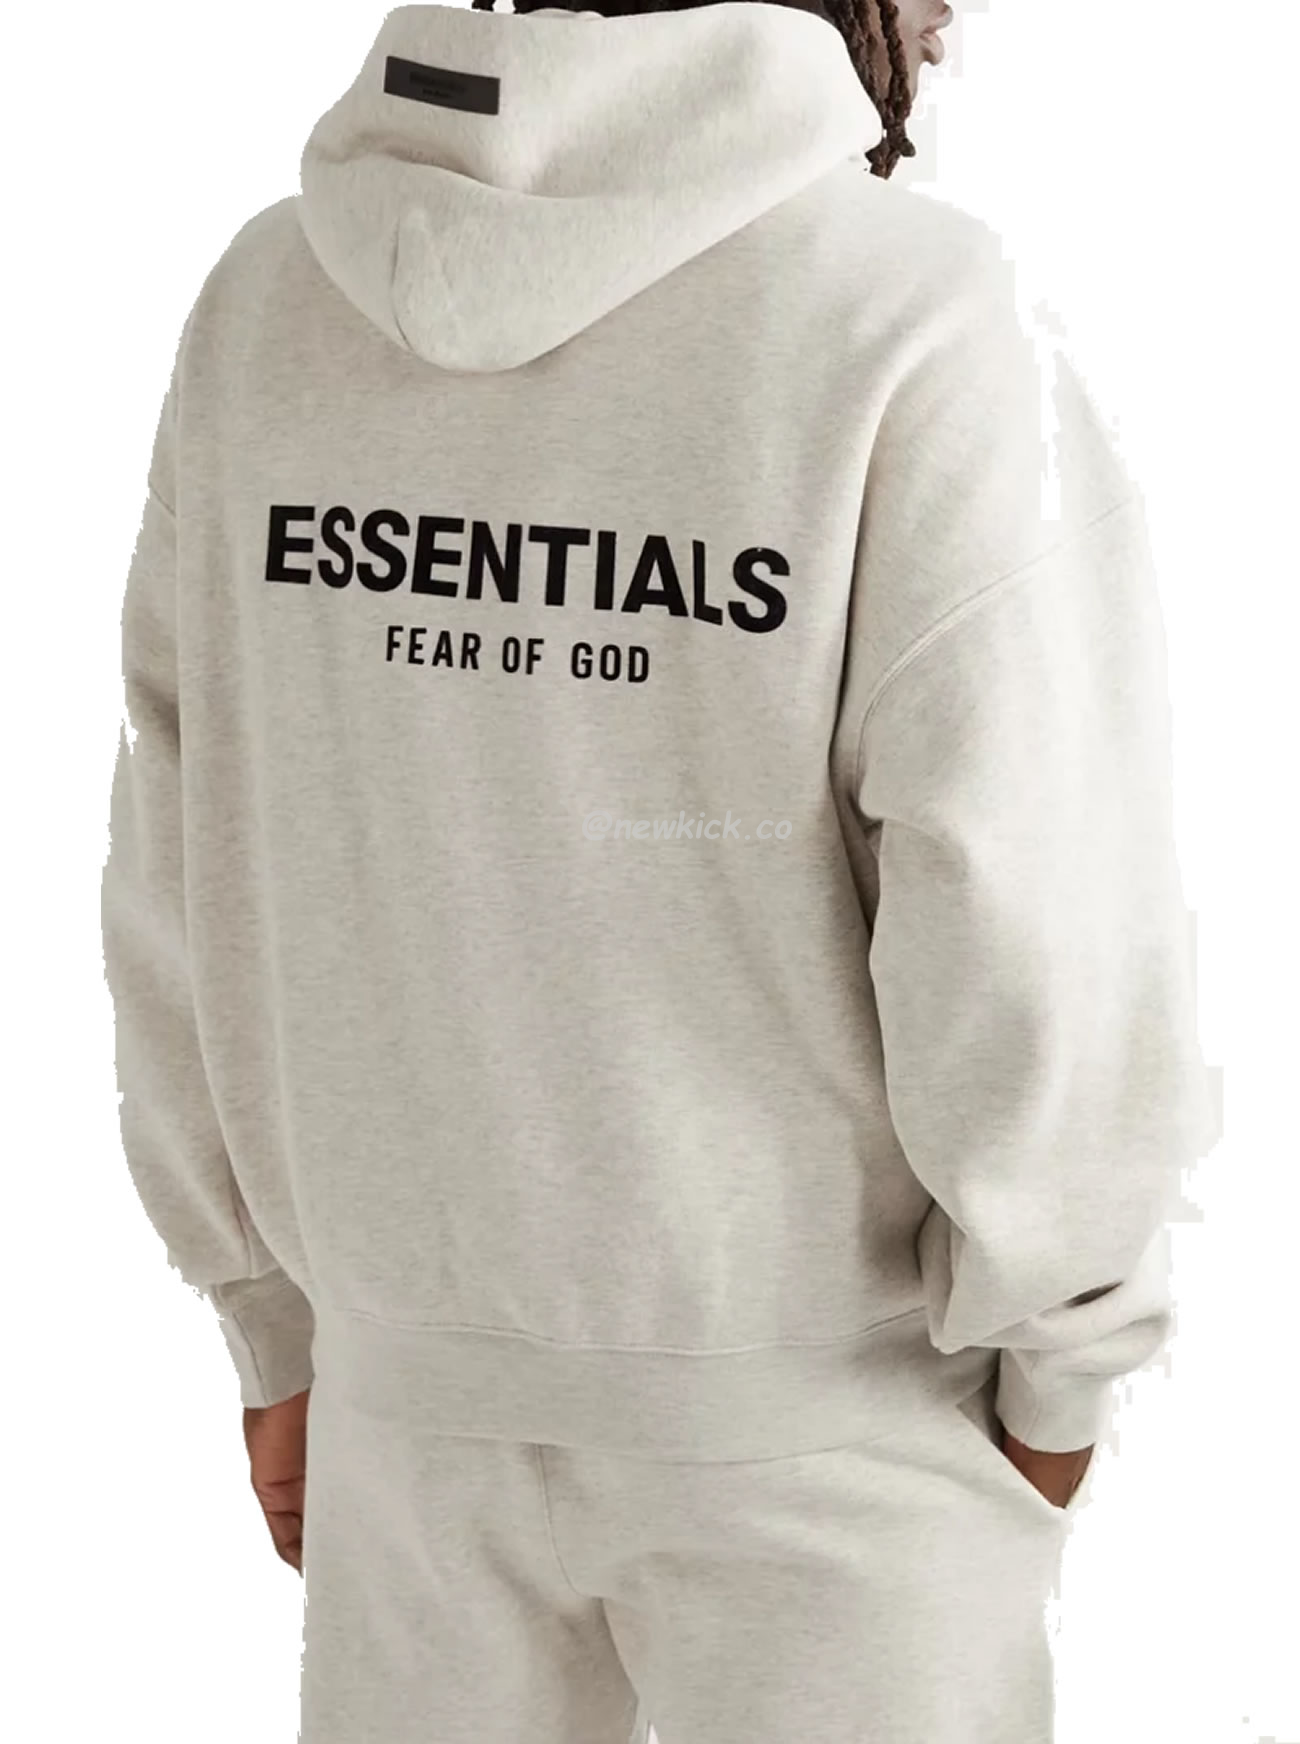 Fear Of God Essentials Core Collection Kids Pullover Hoodie Dark Heather Oatmeal (4) - newkick.org